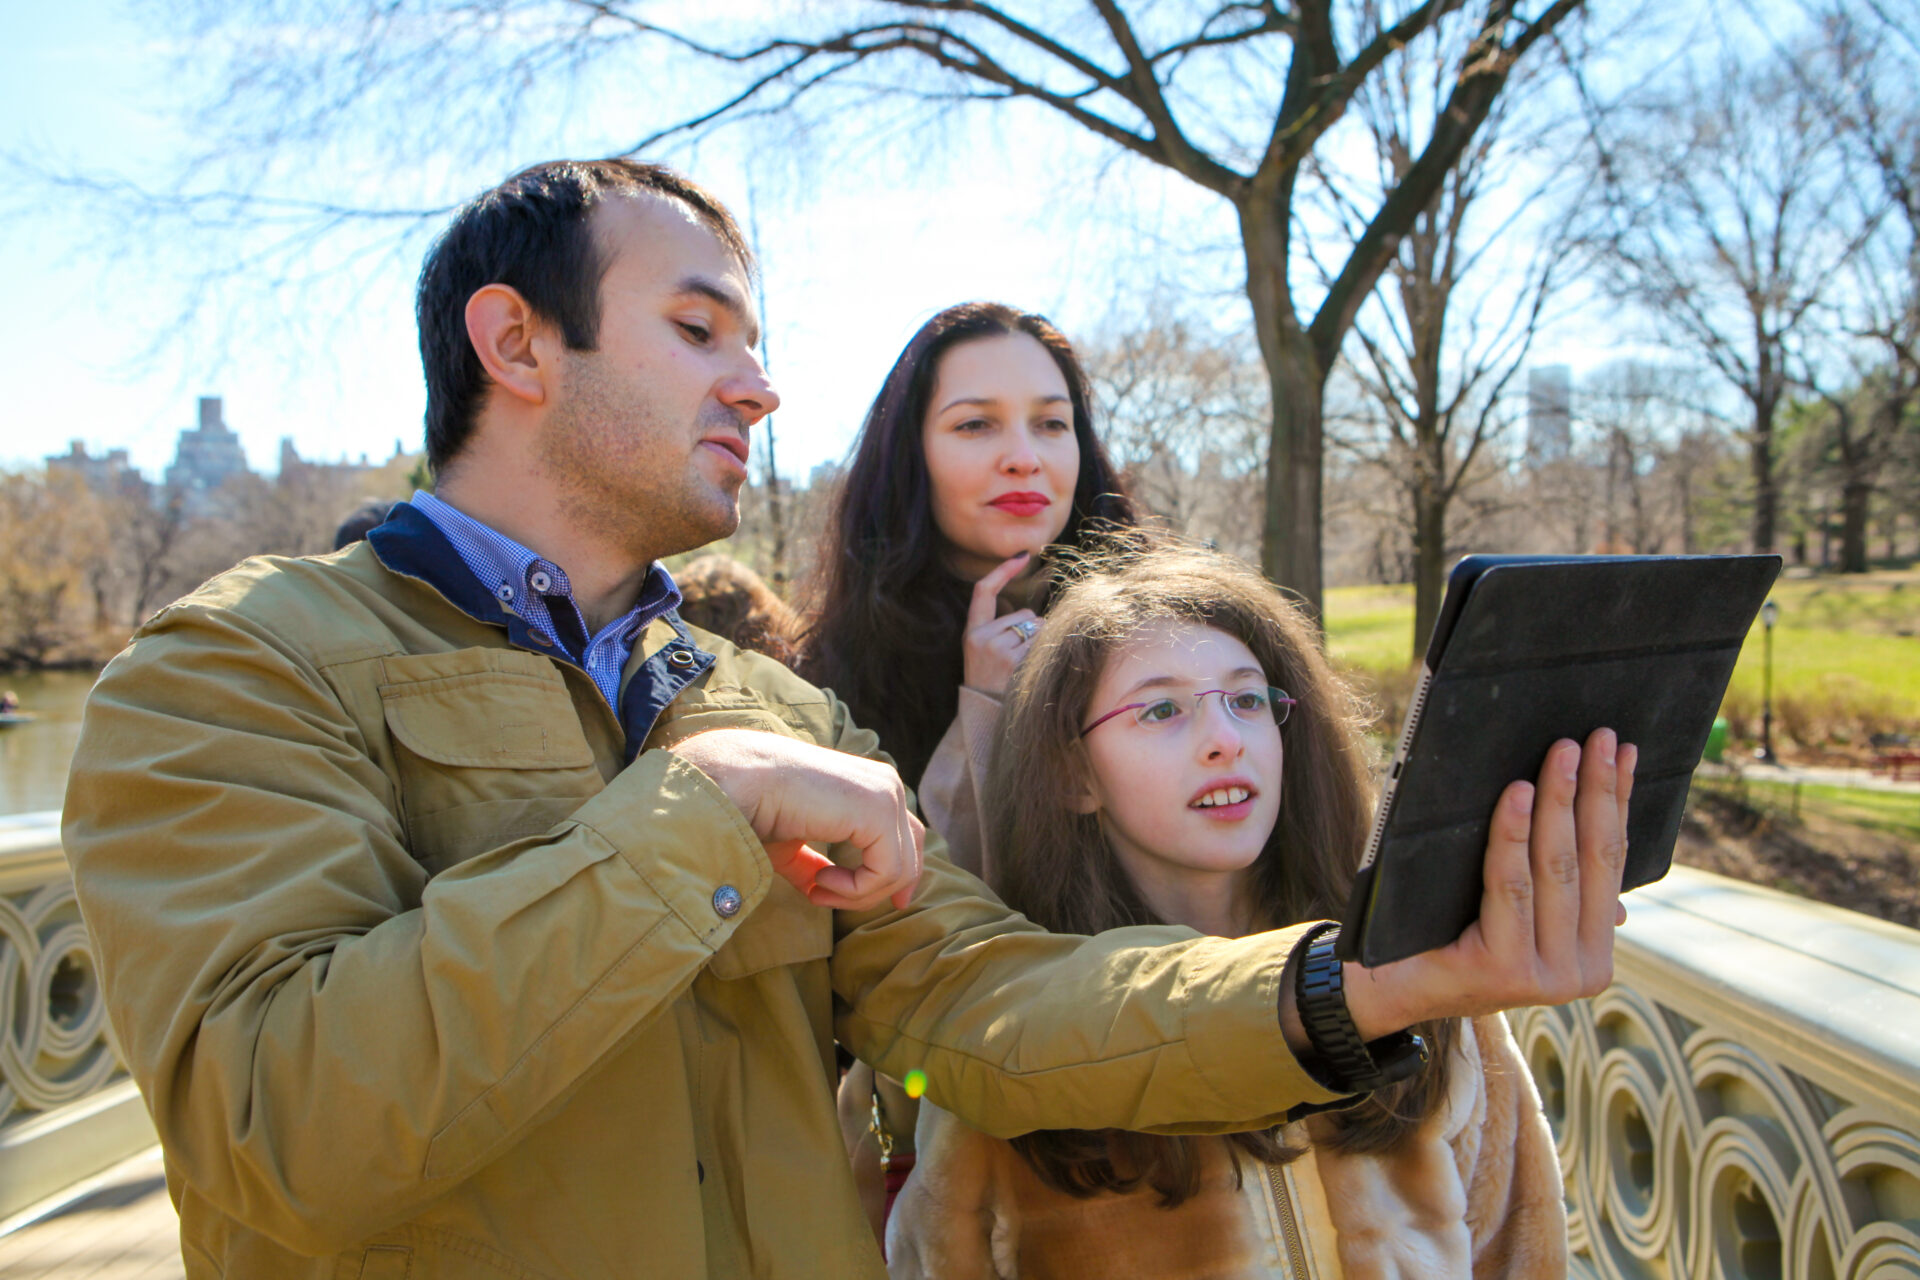 rare photo of Slava using an Apple product (iPad); he is showing pictures to his guests feigning deep interest, shot at the Bow Bridge in Central Park